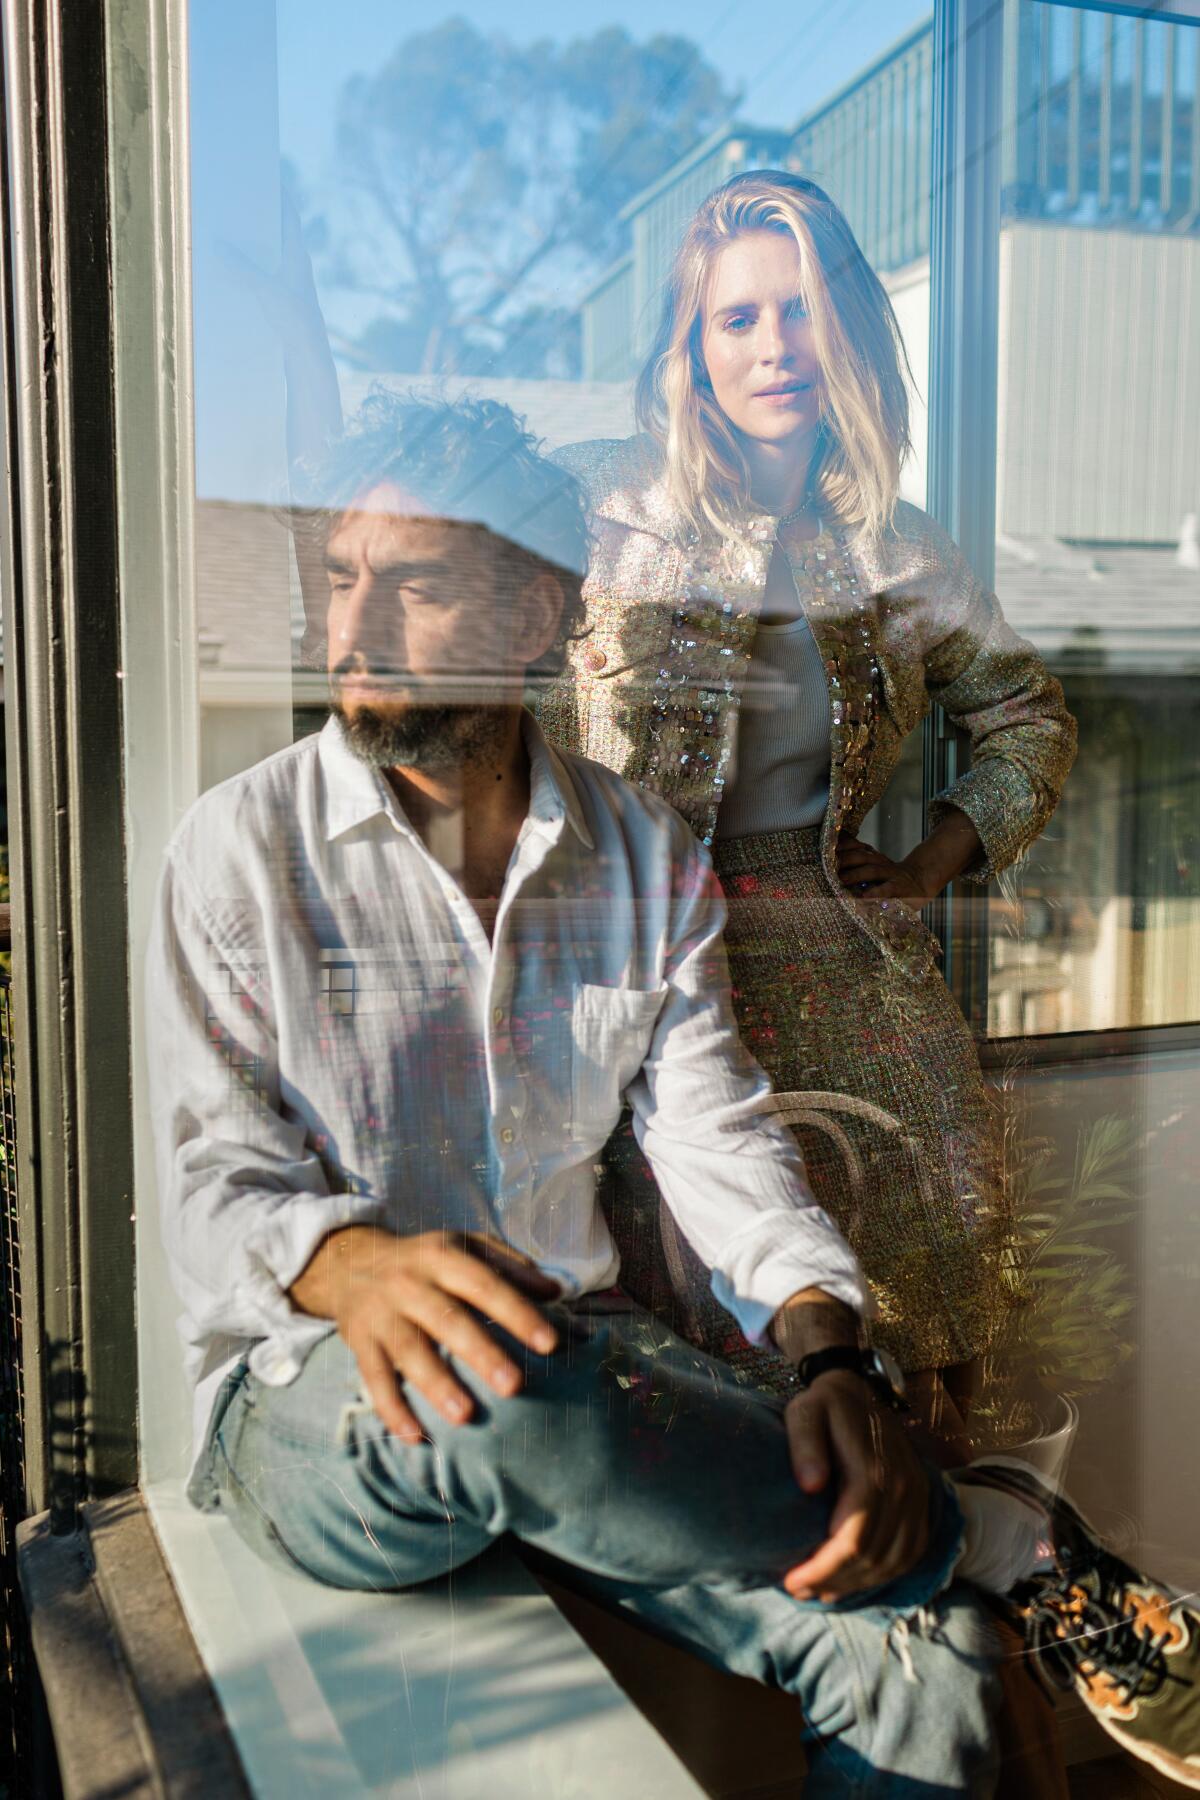 Seen through a picture window, a bearded man in a white shirt looks out as a blond woman behind him looks into the lens.